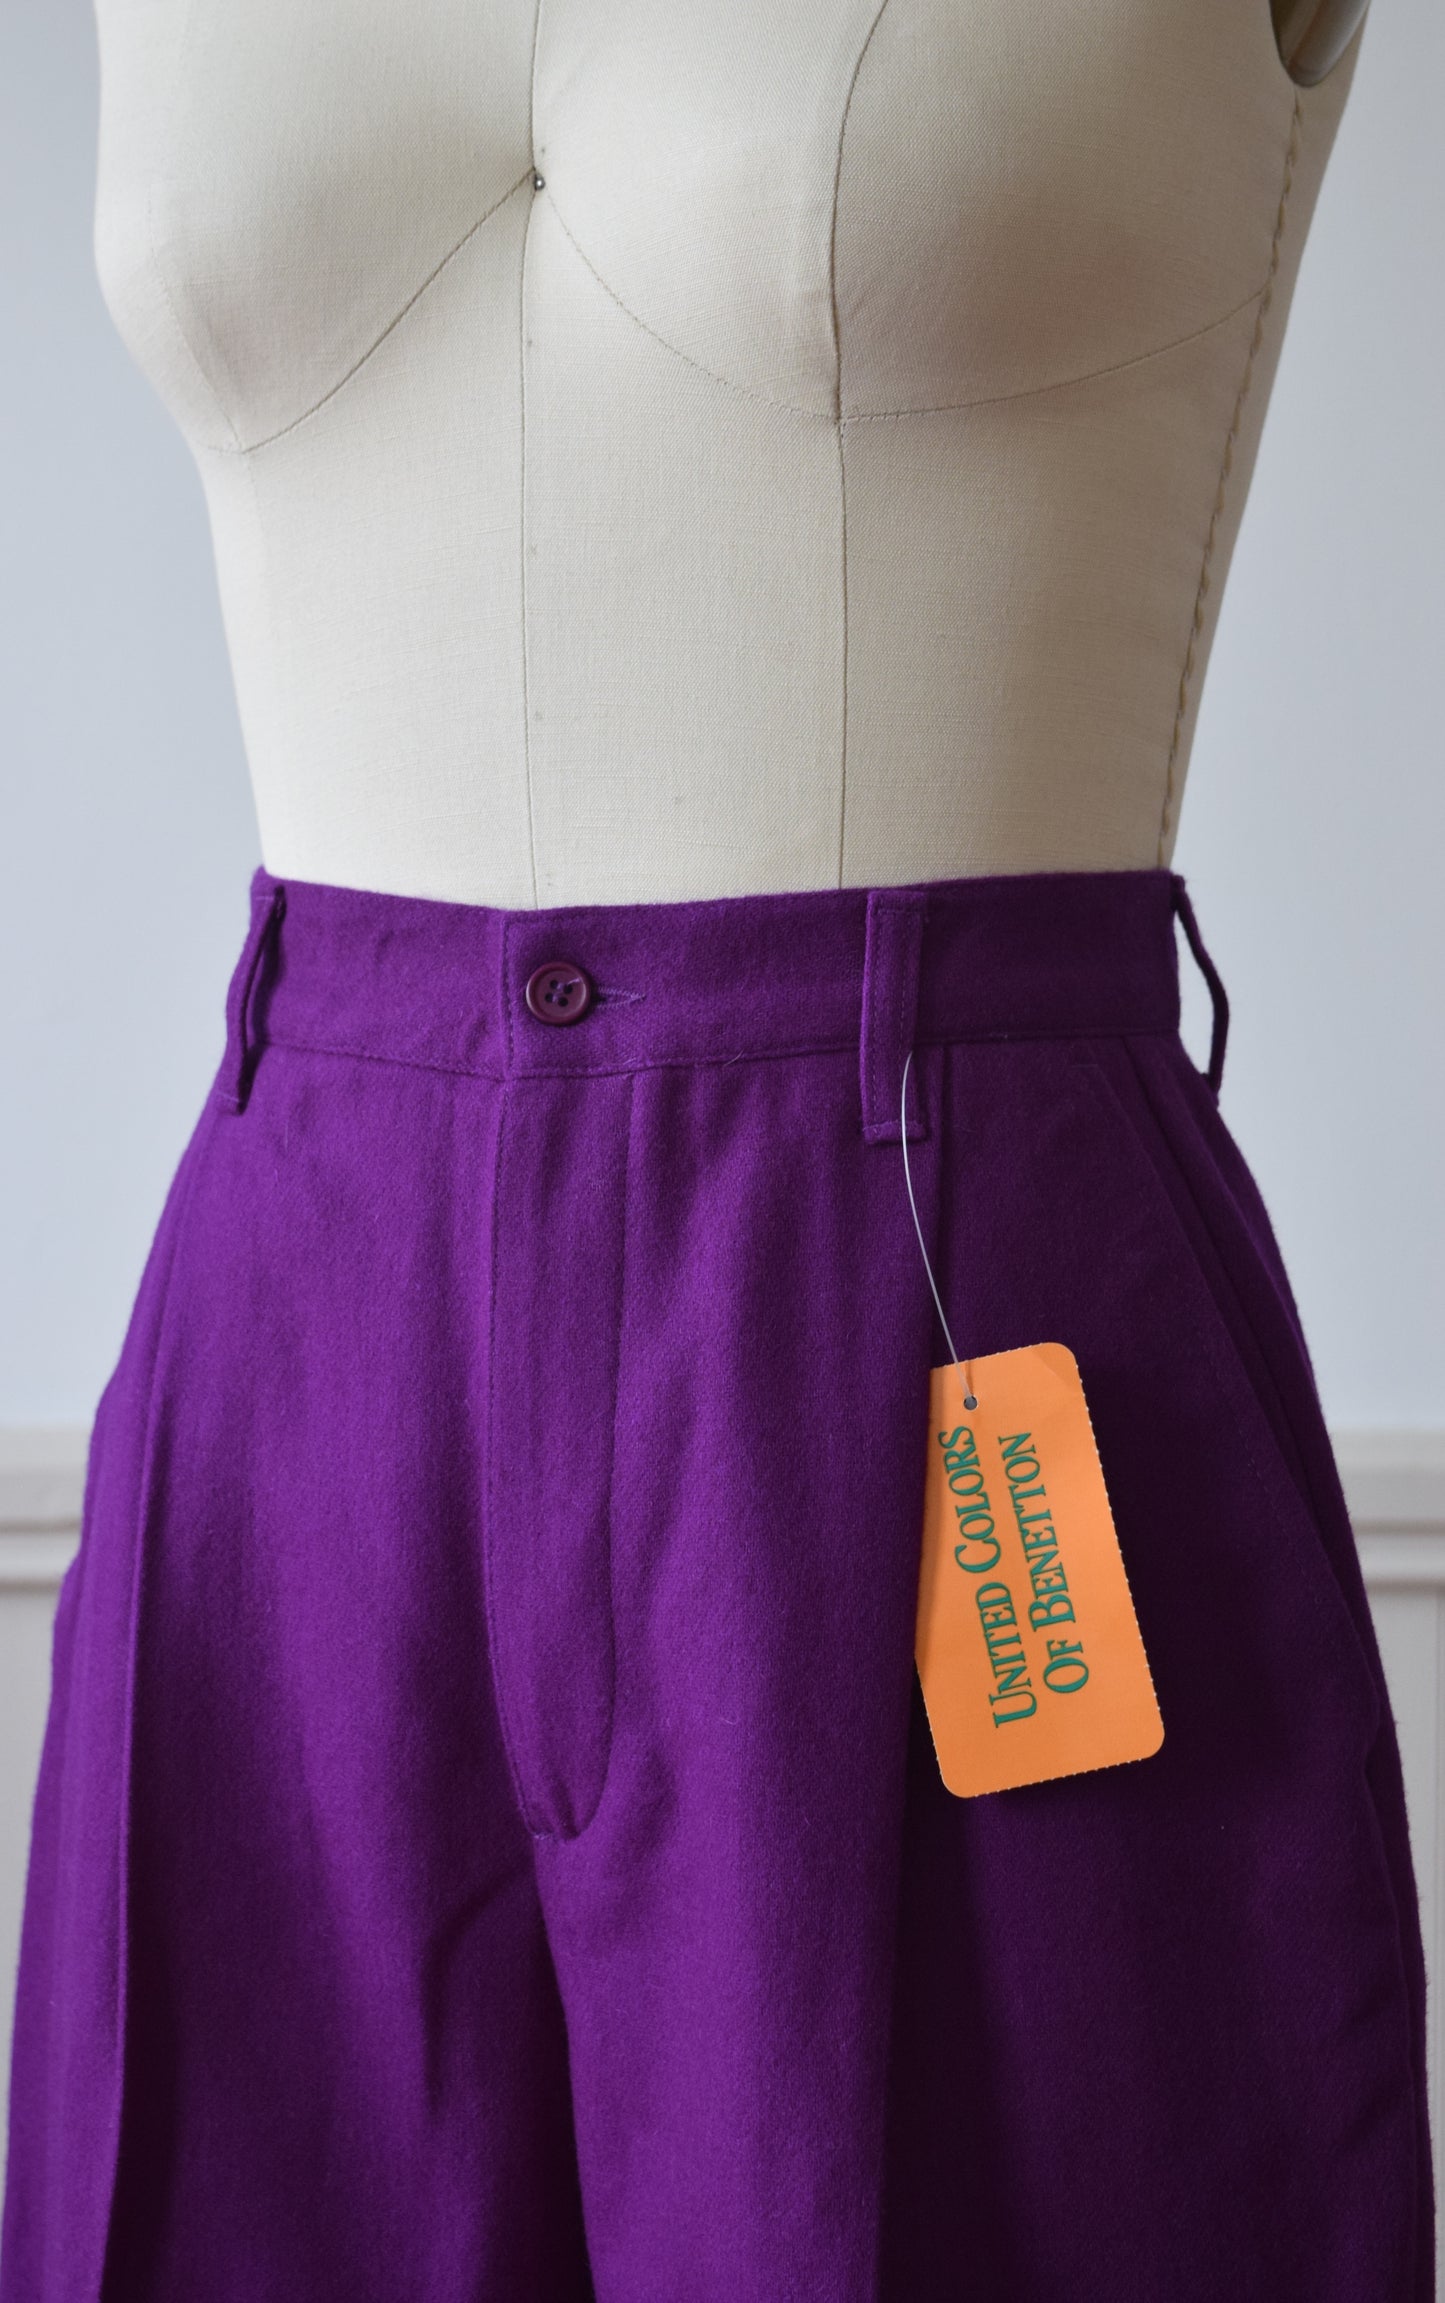 1990s Royal Purple Wool Shorts by United Colors of Benetton | S